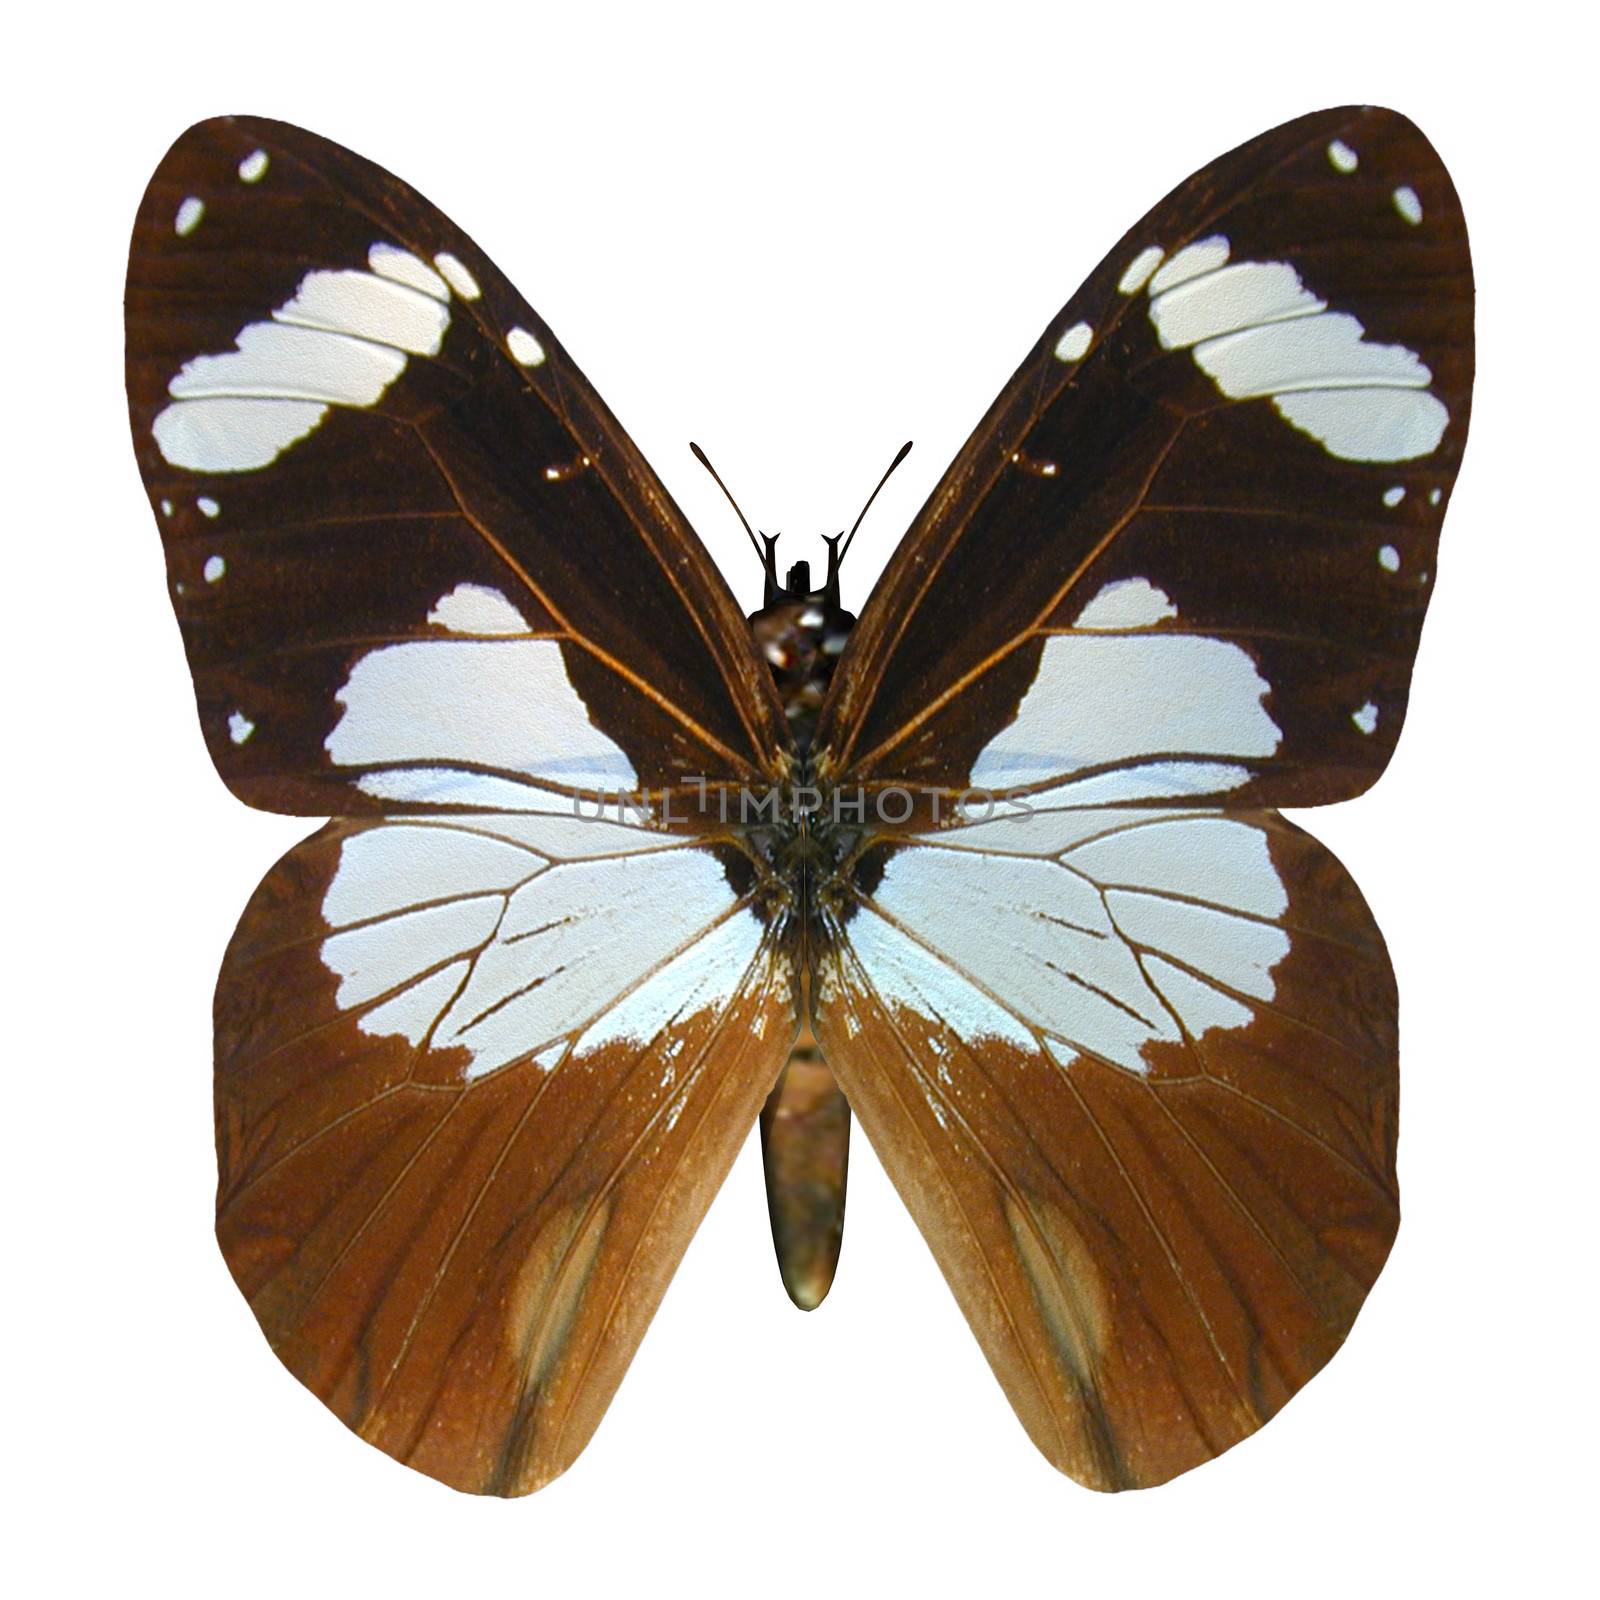 3D digital render of an ivory merchant butterfly on white background